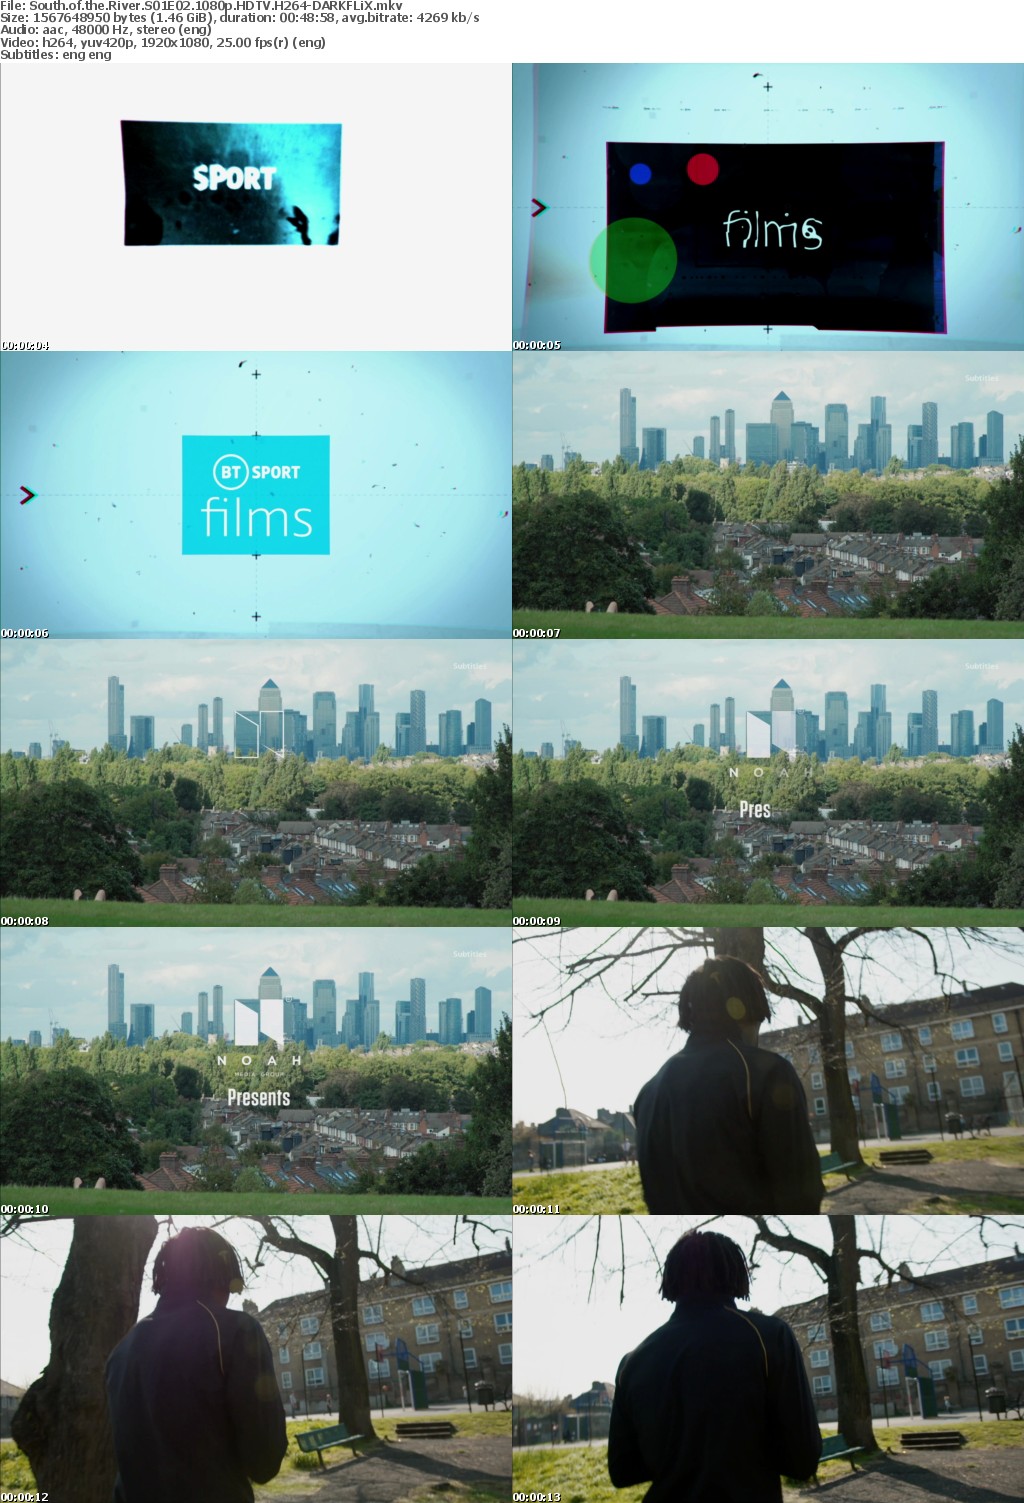 South of the River S01 1080p HDTV H264-DARKFLiX